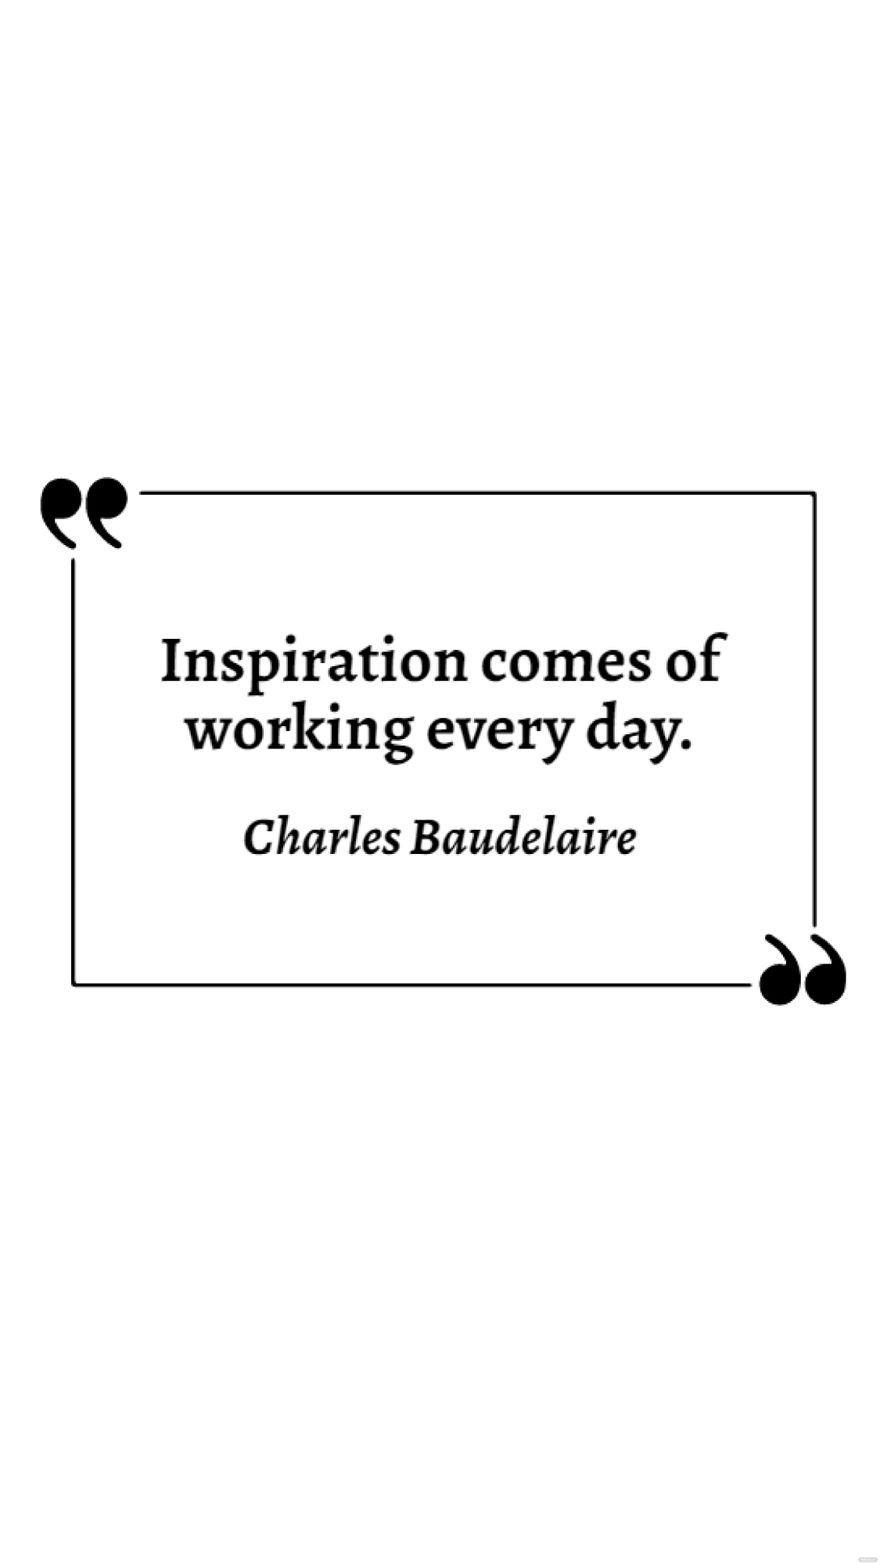 Charles Baudelaire - Inspiration comes of working every day.